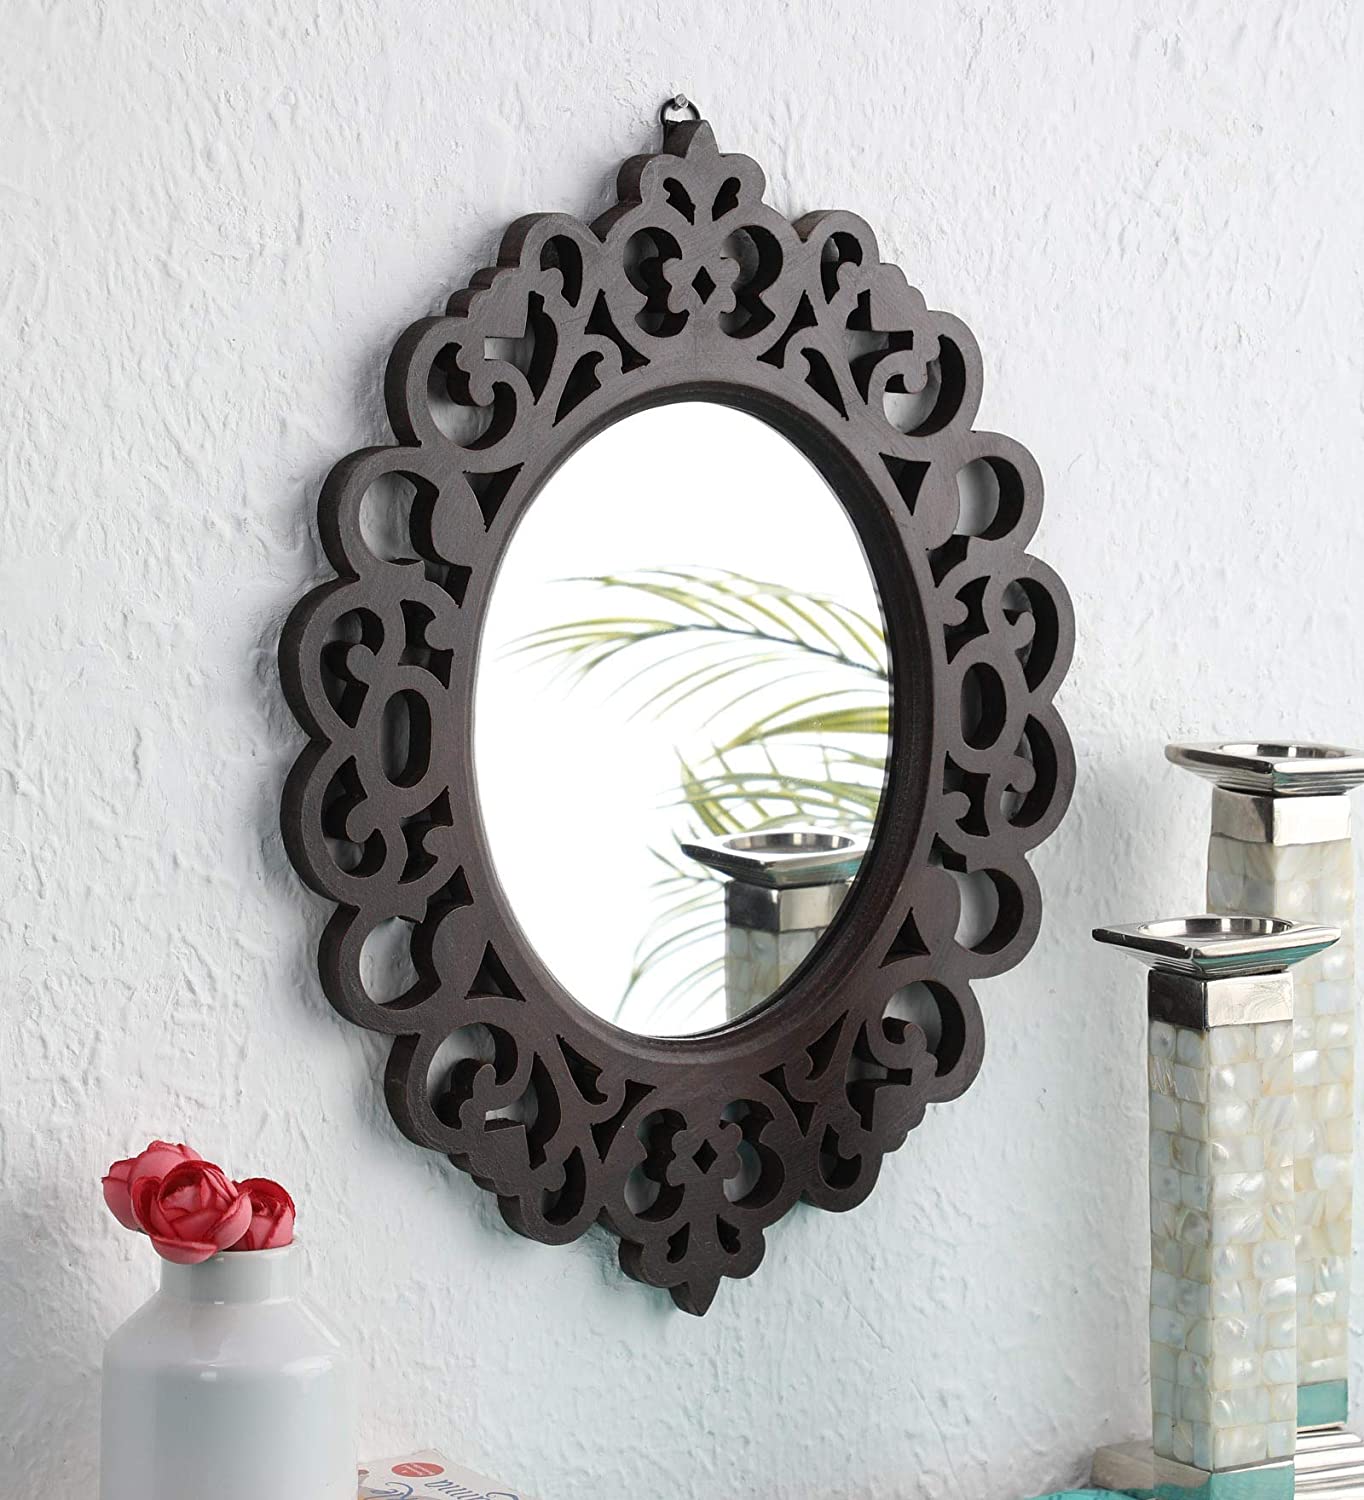 Engineered Wood Oval Decorative Wall Mount Mirror (18 x 14 inch, Brown), Model: TUS-MR-47, Framed